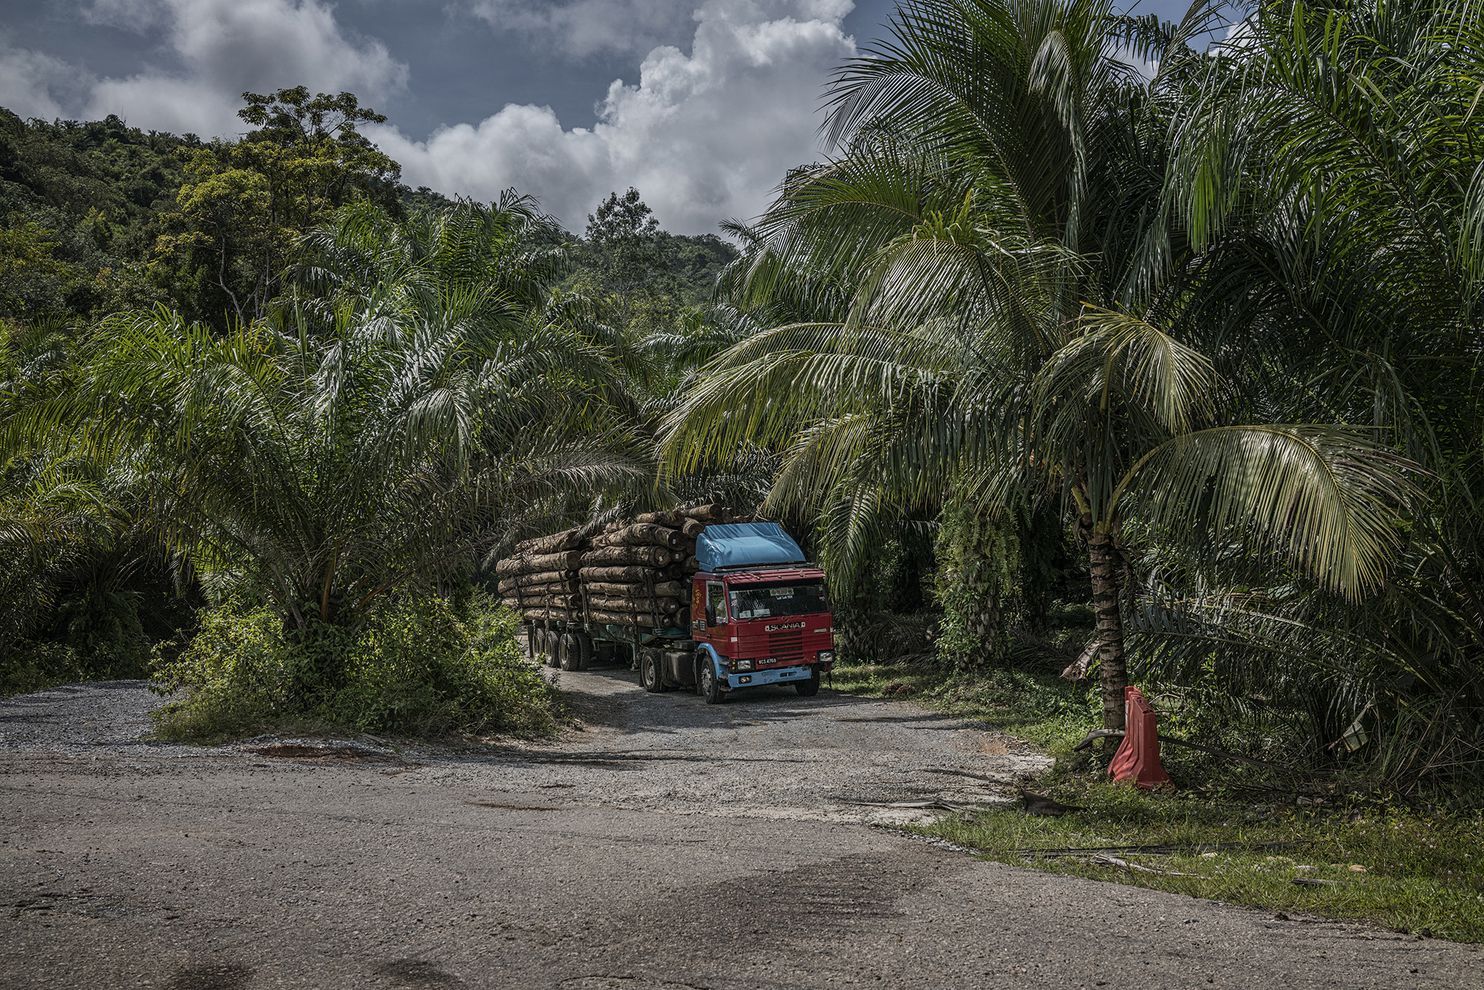 A logging truck exits the rainforest. There seems to be no place for hunter-gatherers such as the Batek along the path Malaysia is blazing into the future. Image by James Whitlow Delano. Malaysia, 2019.